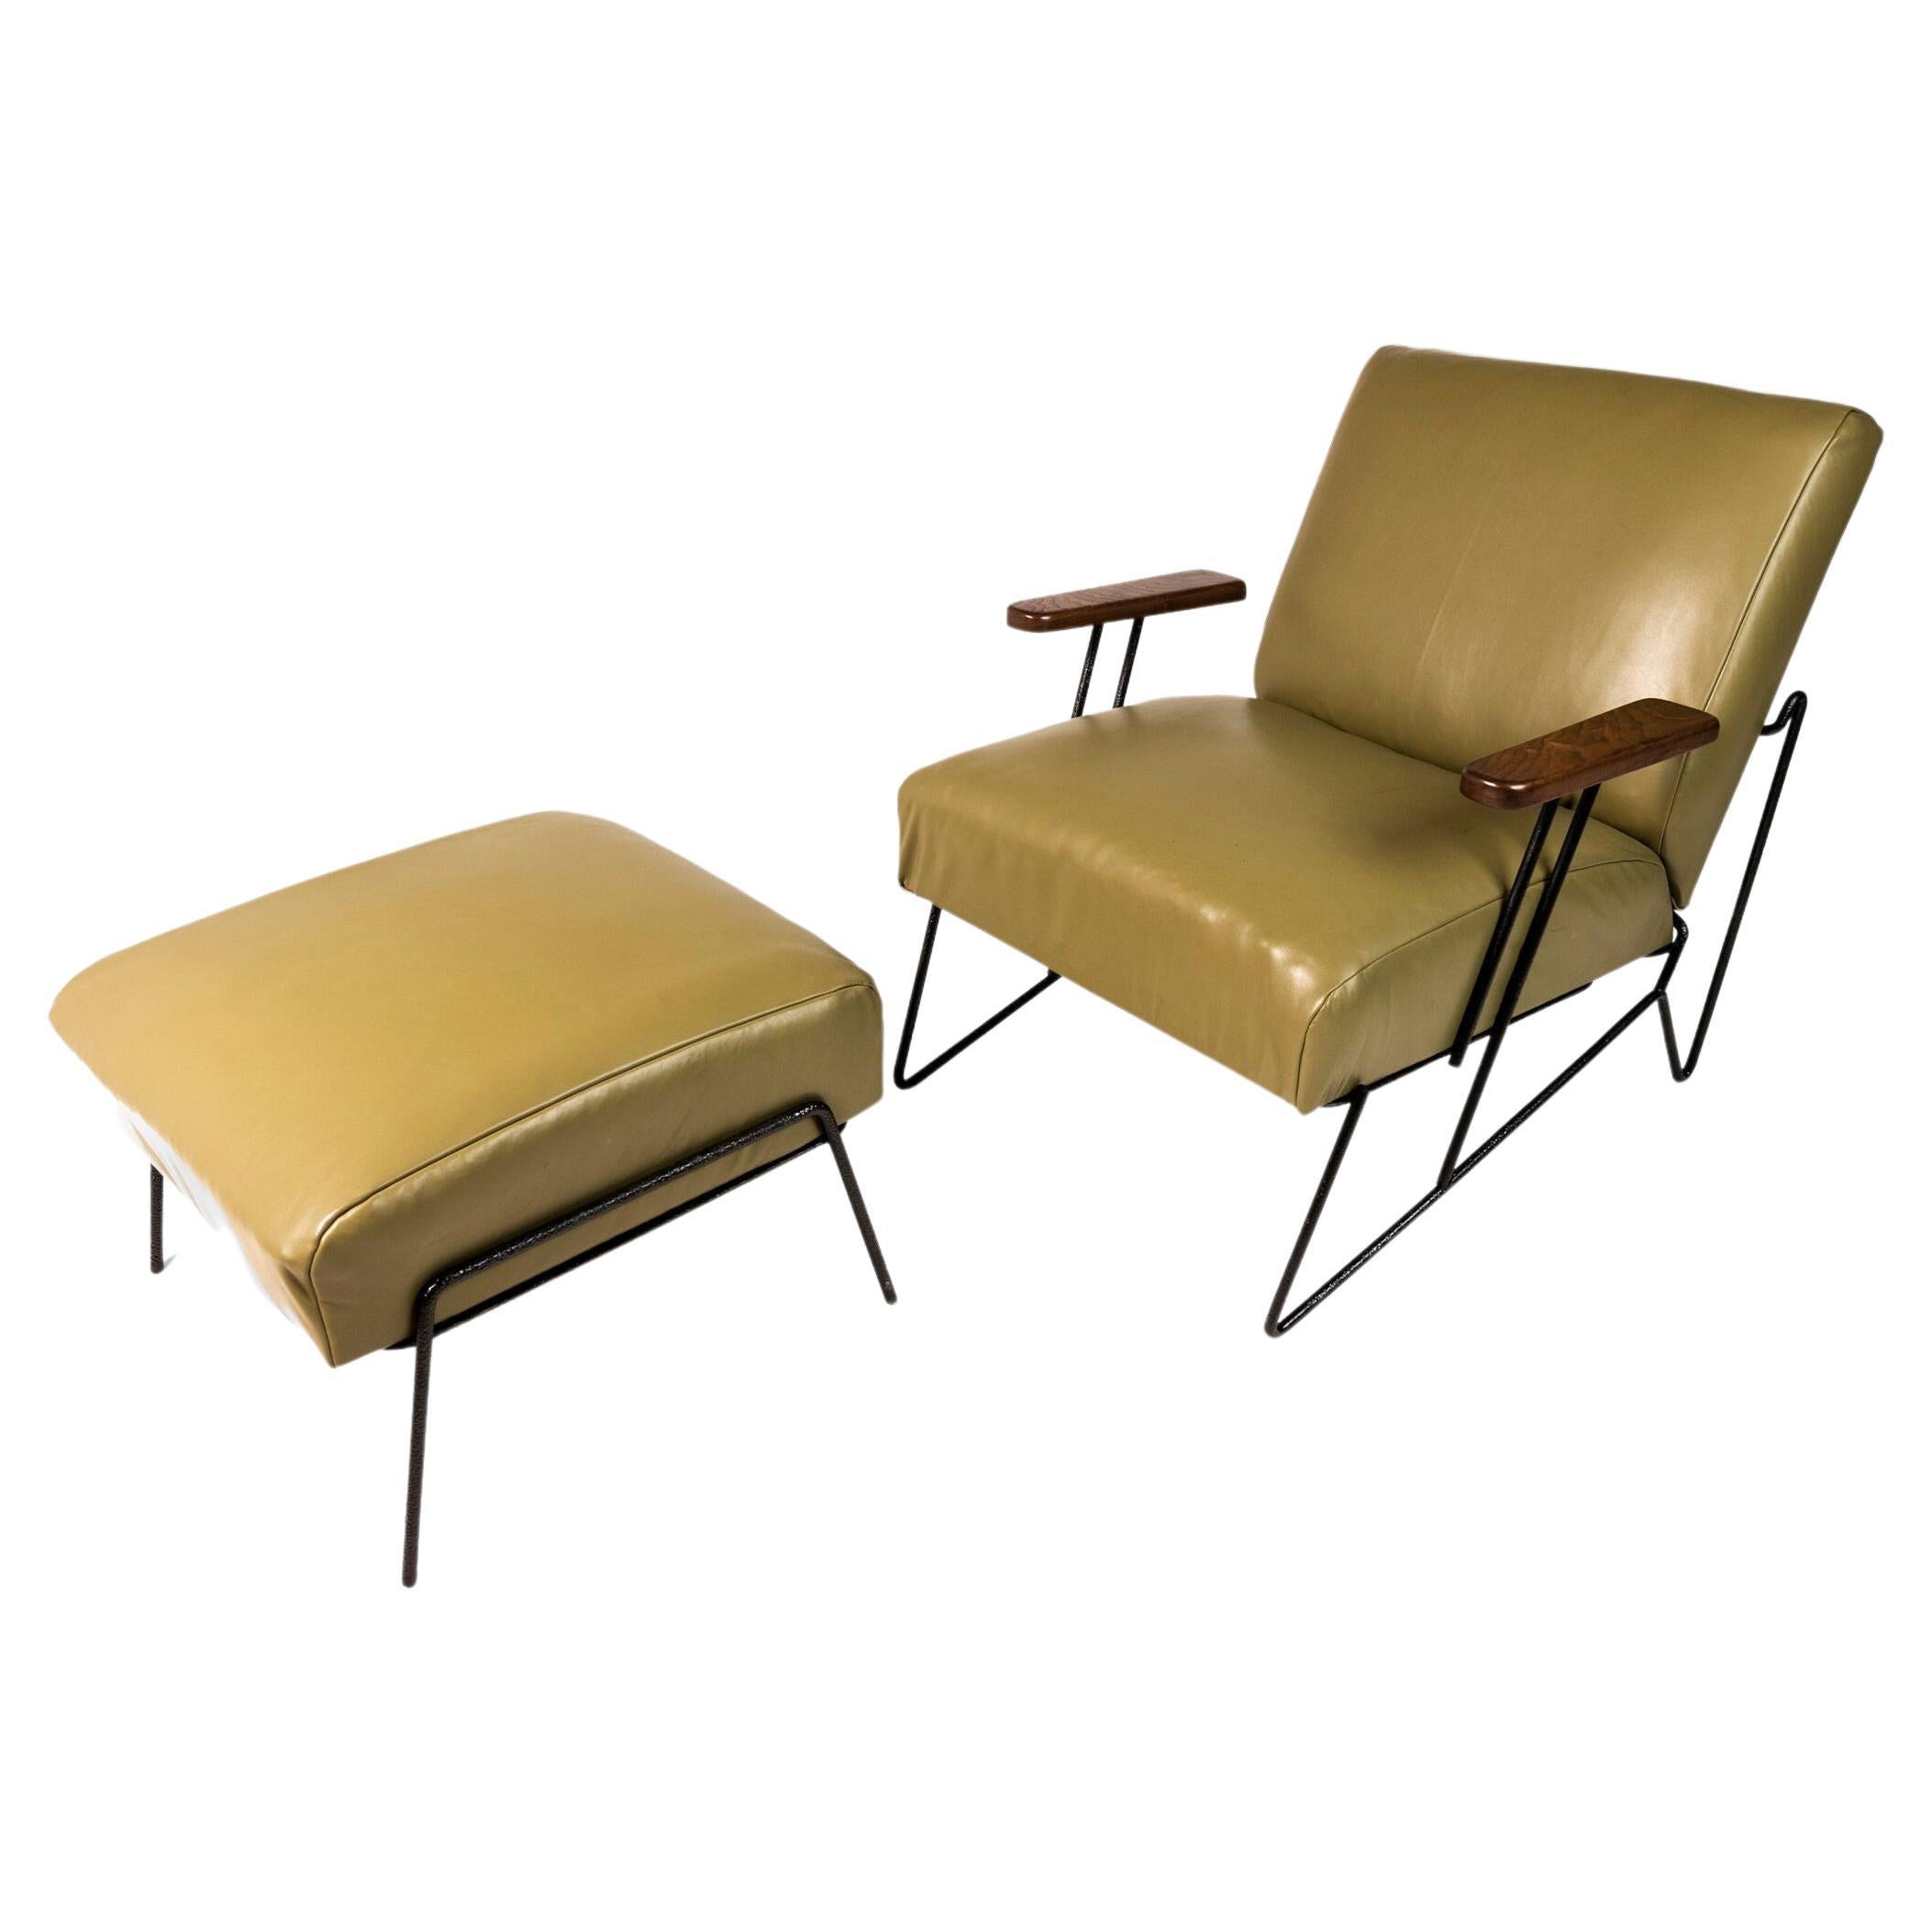 Restored Wrought Iron Chair and Ottoman by Dan Johnson for Pacific Iron, USA